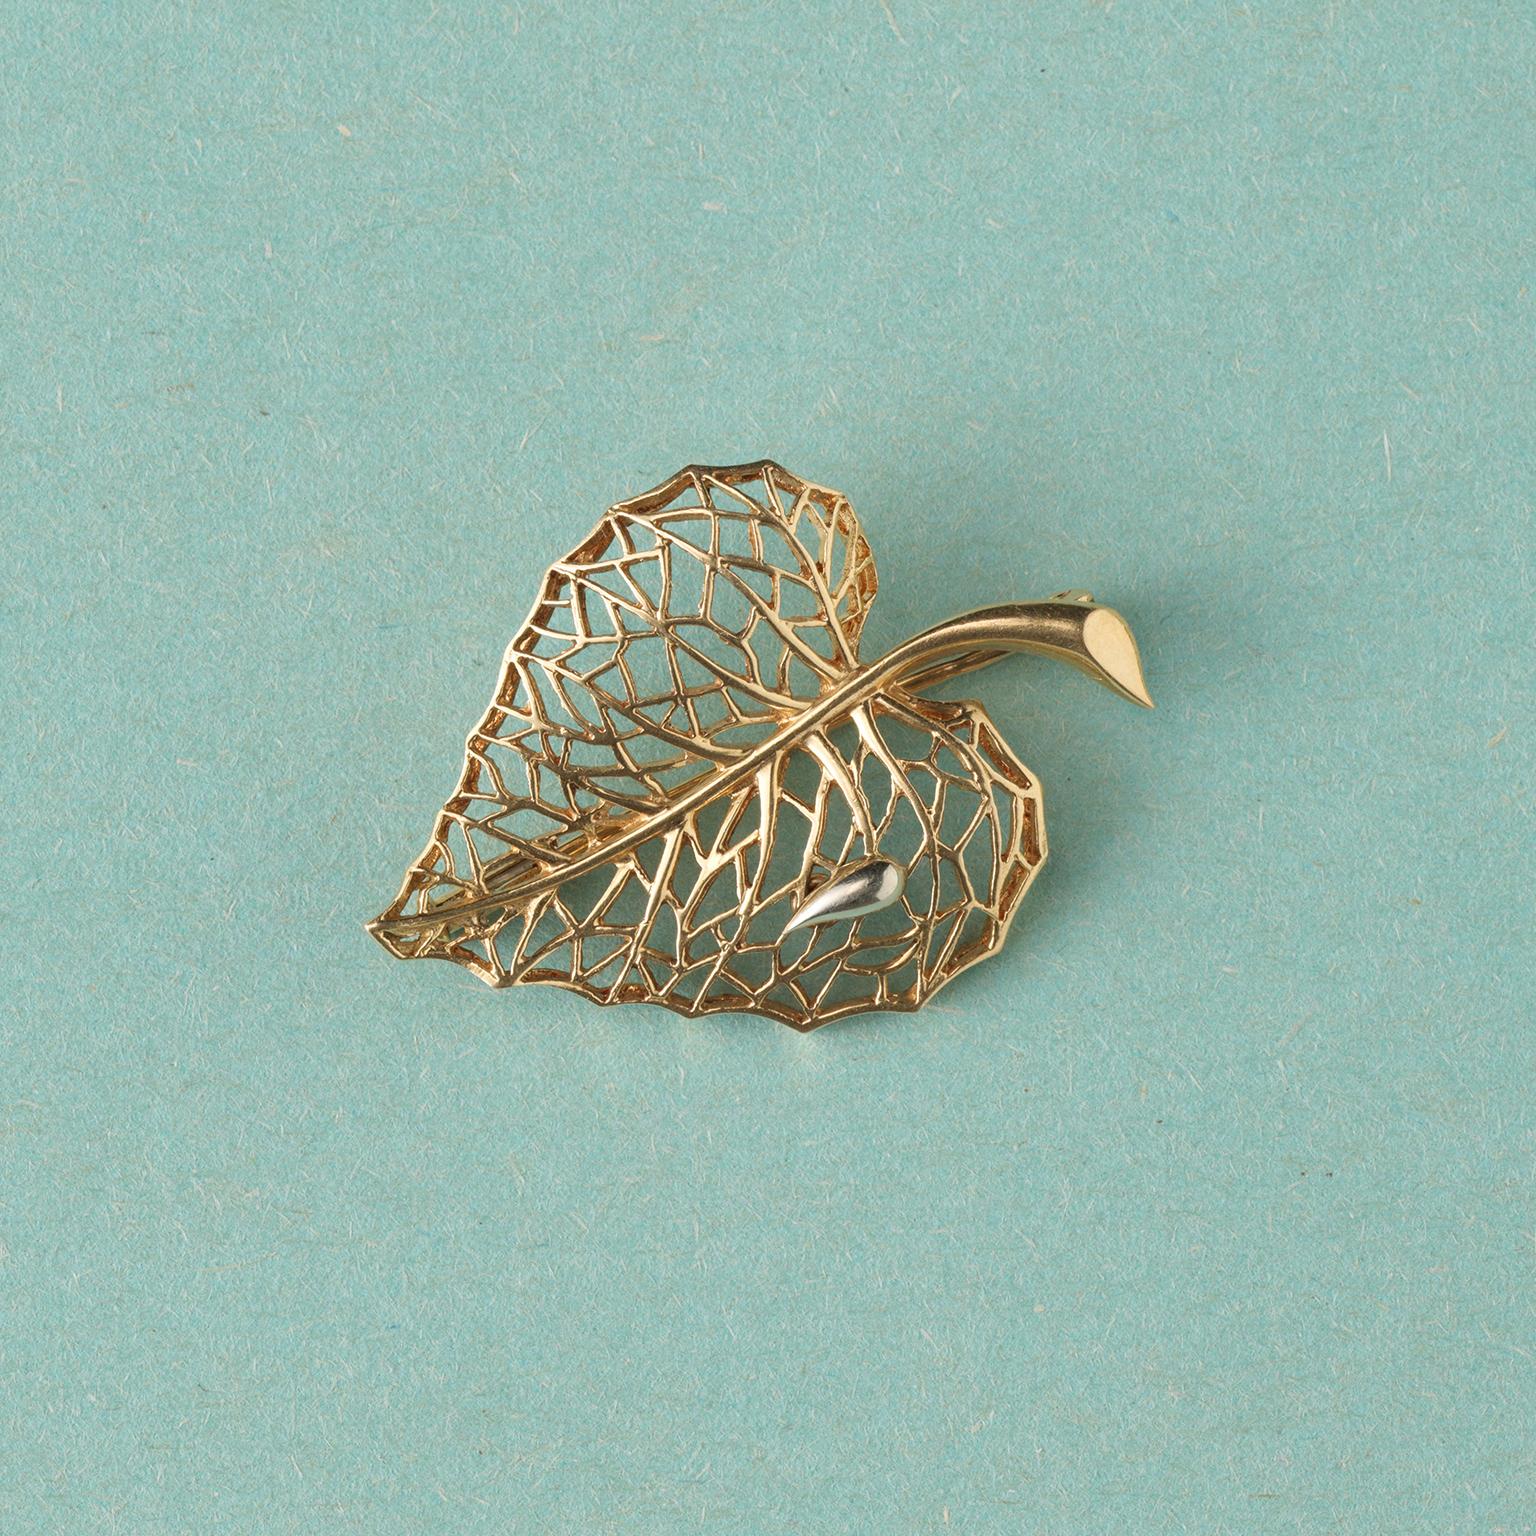 An 18 carat gold leaf brooch open worked with a drop of dew, France.

weight: 6.76 grams
dimensions: 4 x 2.8 grams